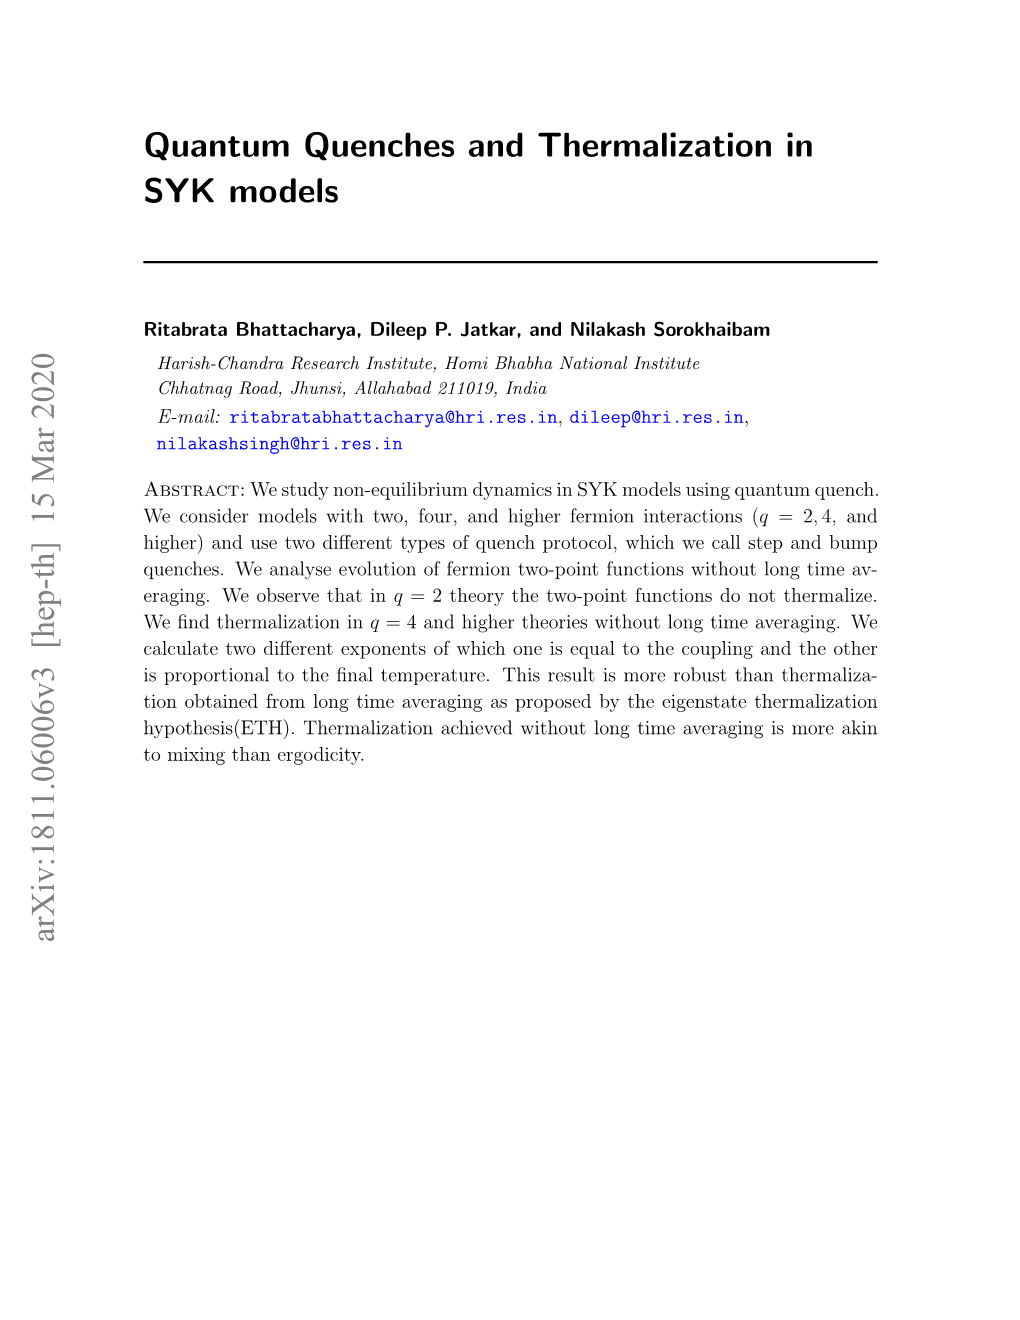 Quantum Quenches and Thermalization in SYK Models